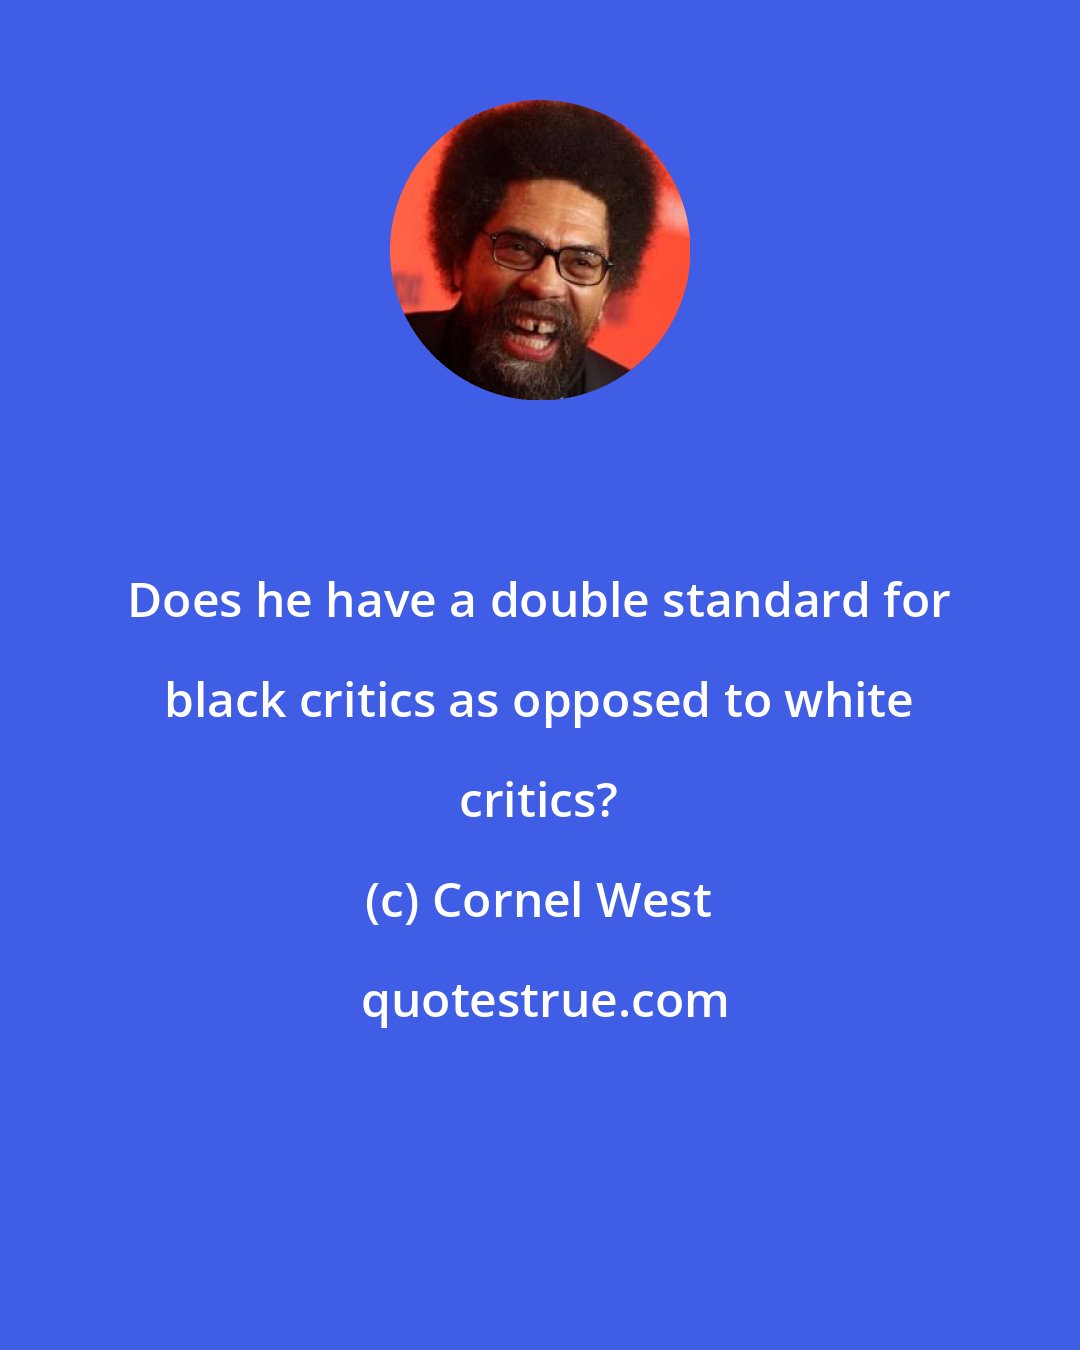 Cornel West: Does he have a double standard for black critics as opposed to white critics?